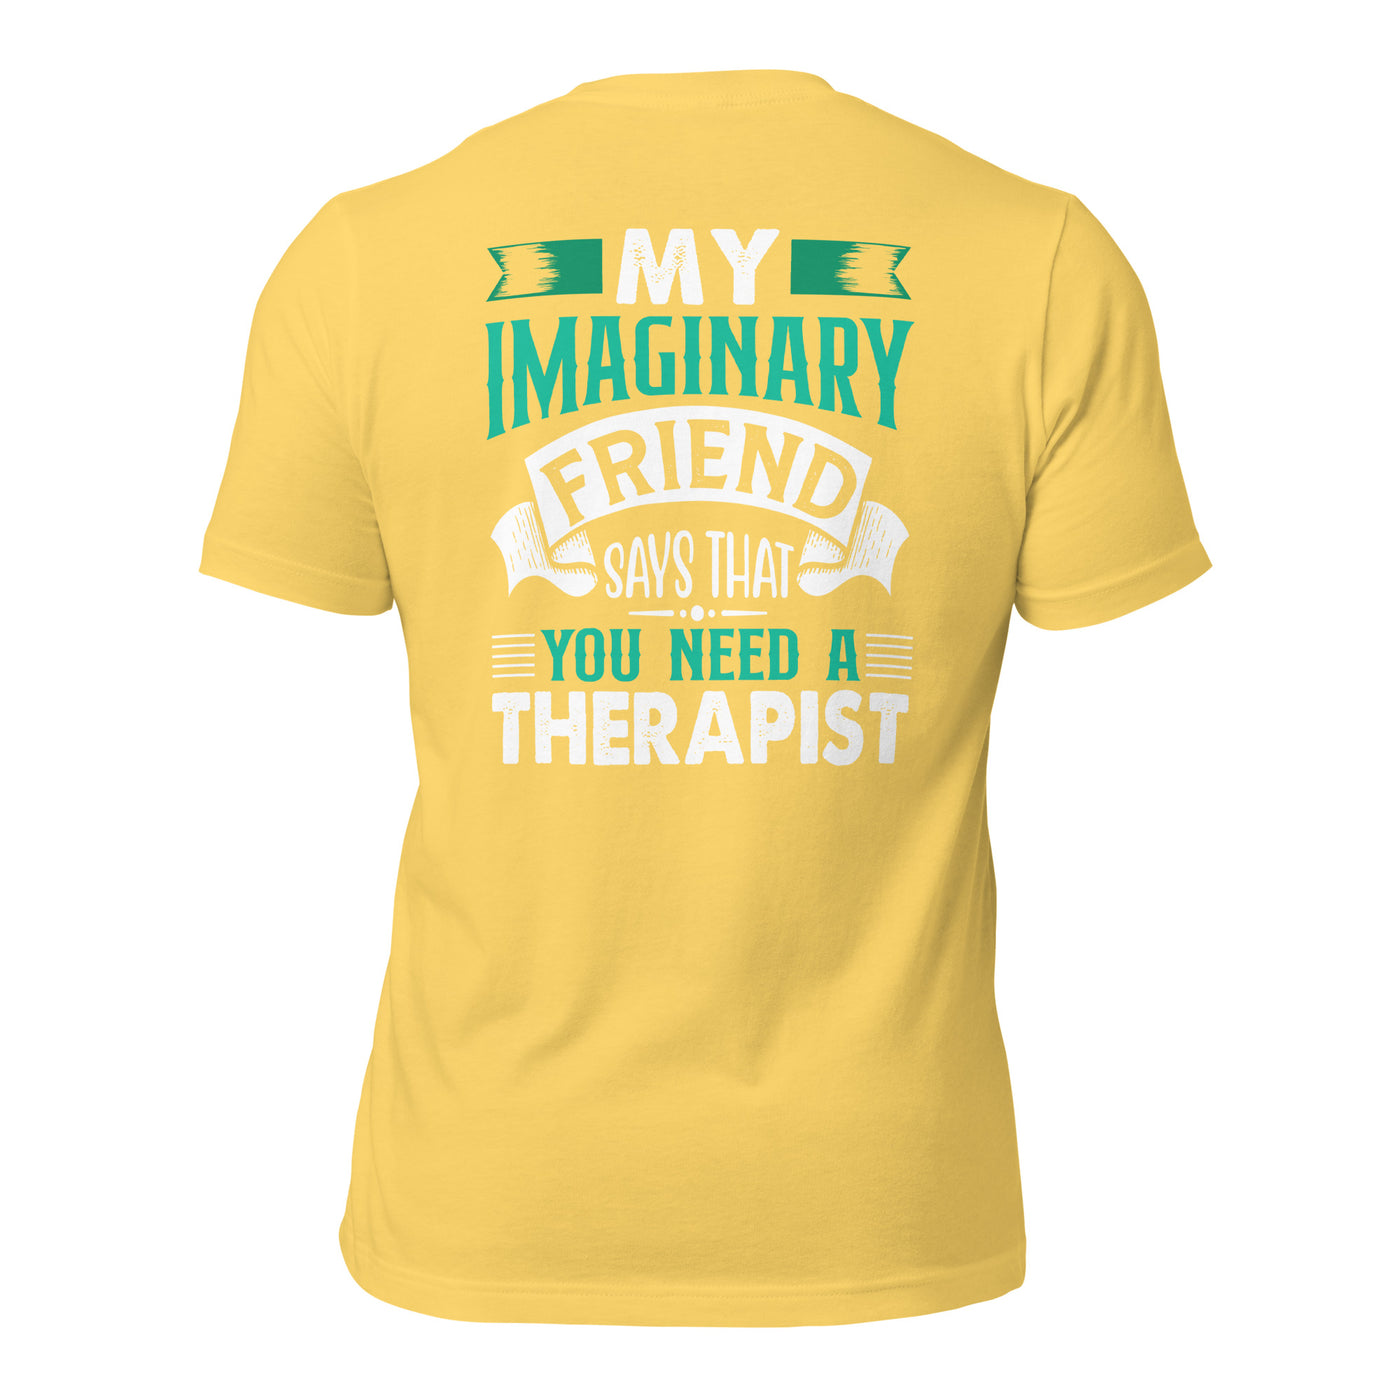 My imaginary friend Says you Need a therapist ( Back Print ) - Unisex t-shirt